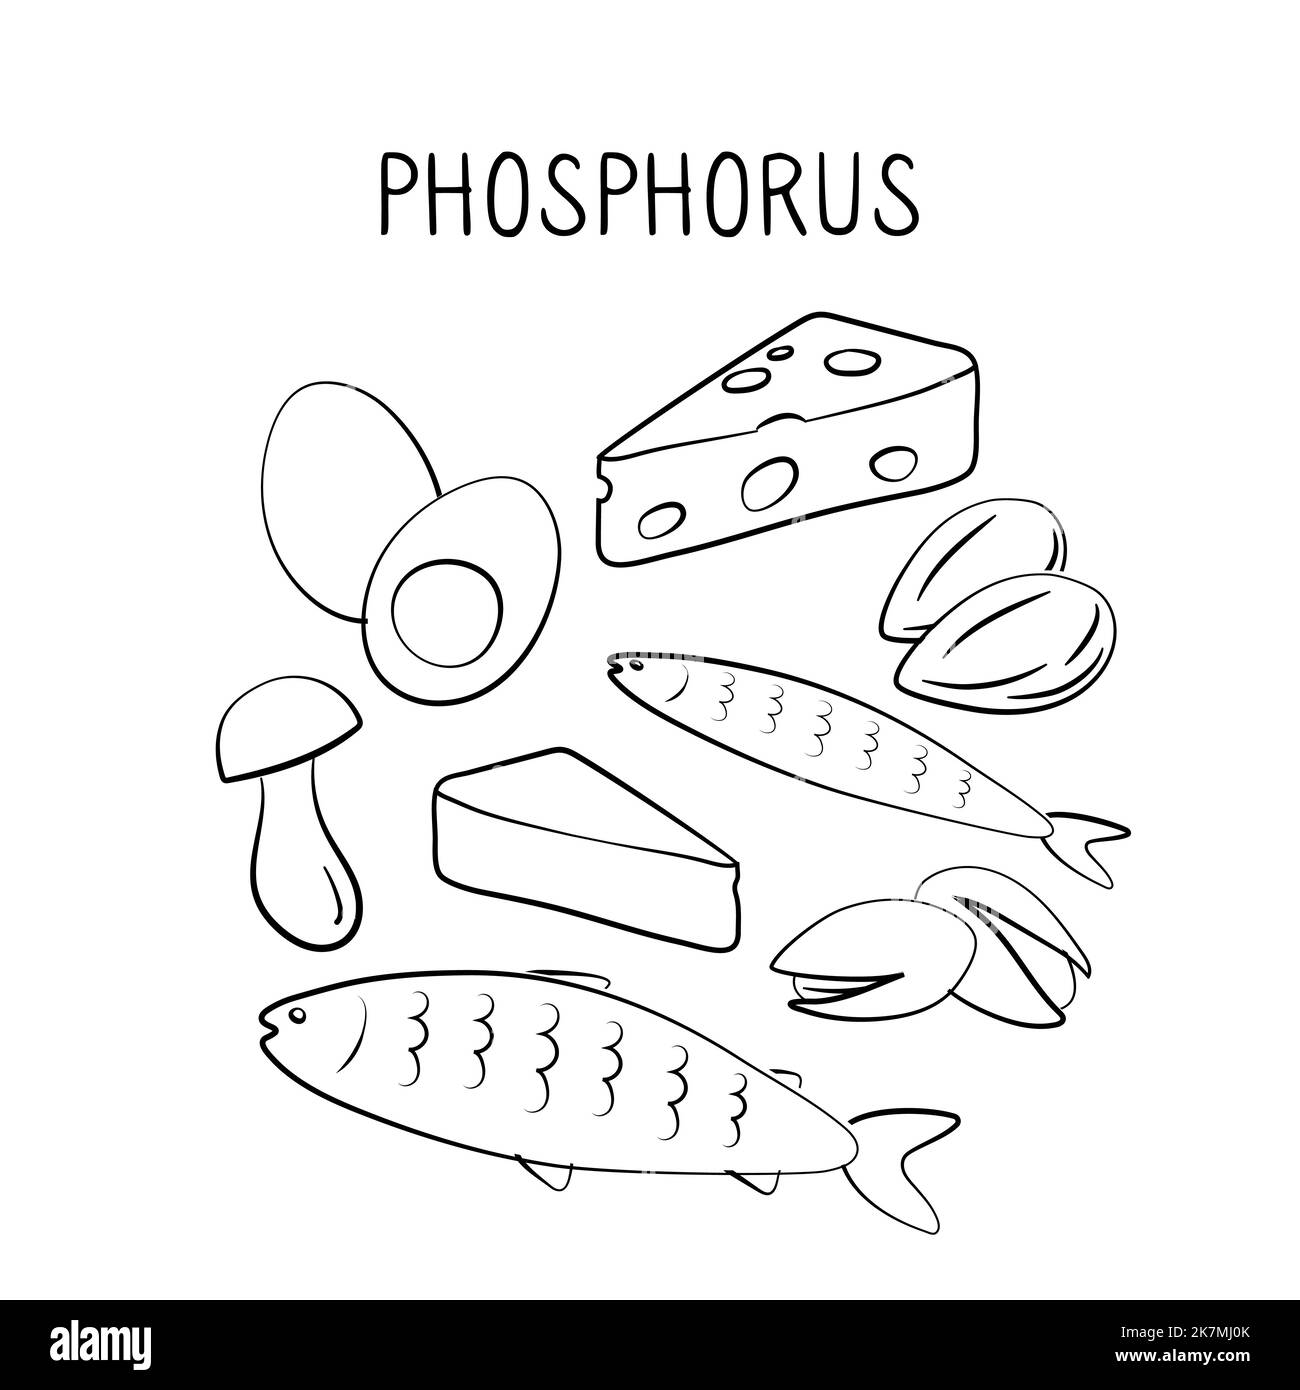 Phosphorus-containing food. Groups of healthy products containing vitamins and minerals. Set of fruits, vegetables, meats, fish and dairy. Stock Vector